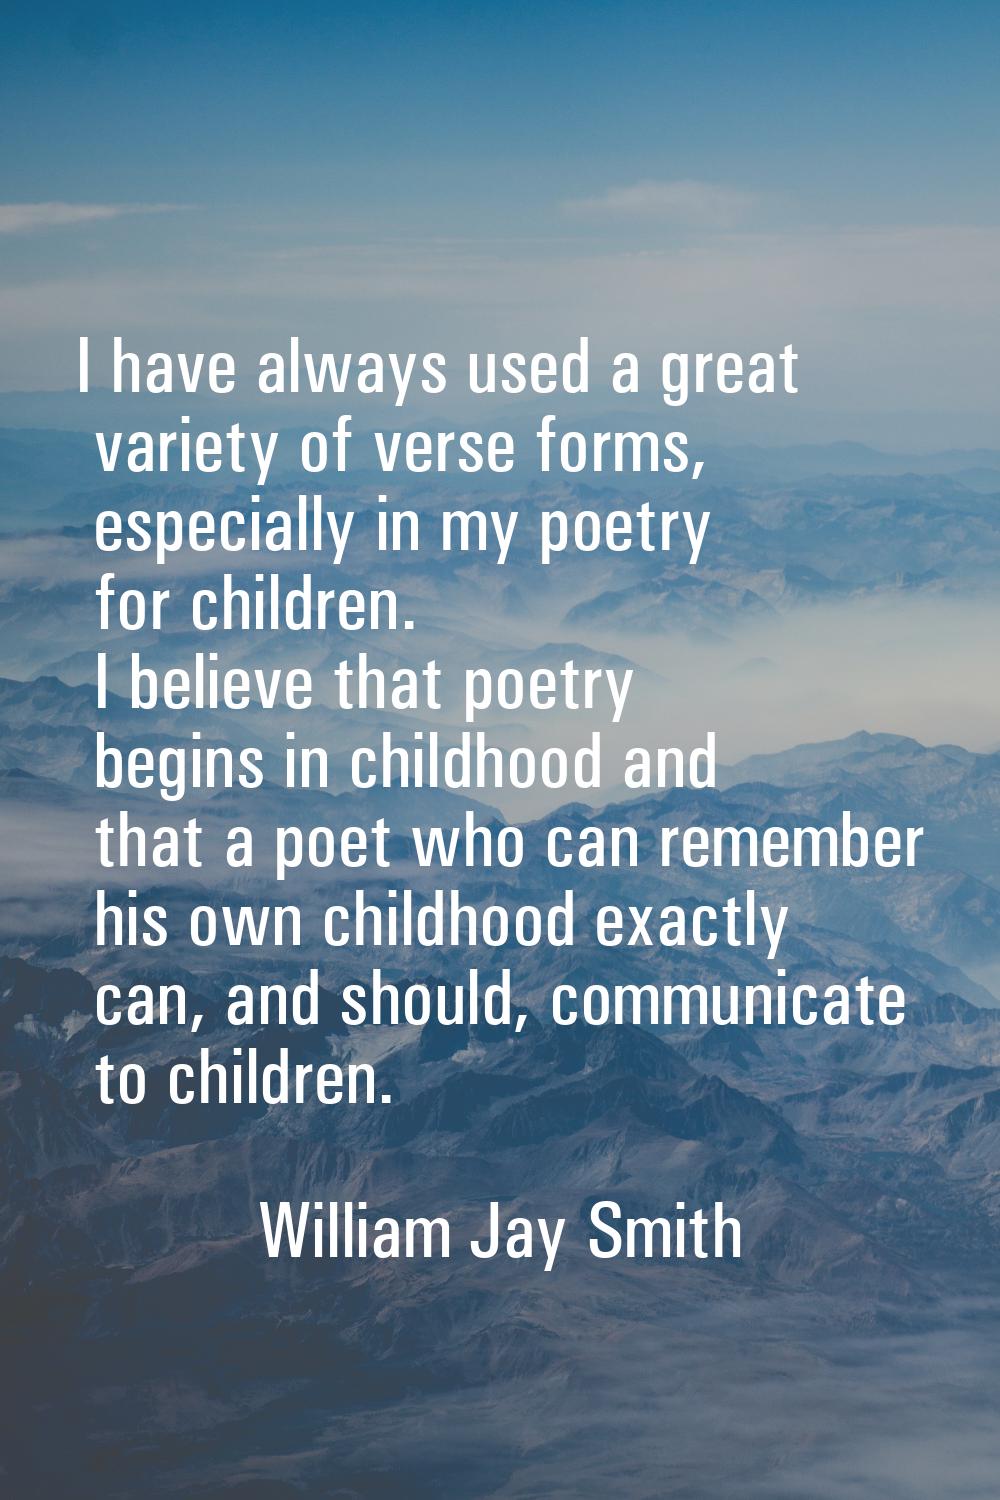 I have always used a great variety of verse forms, especially in my poetry for children. I believe 